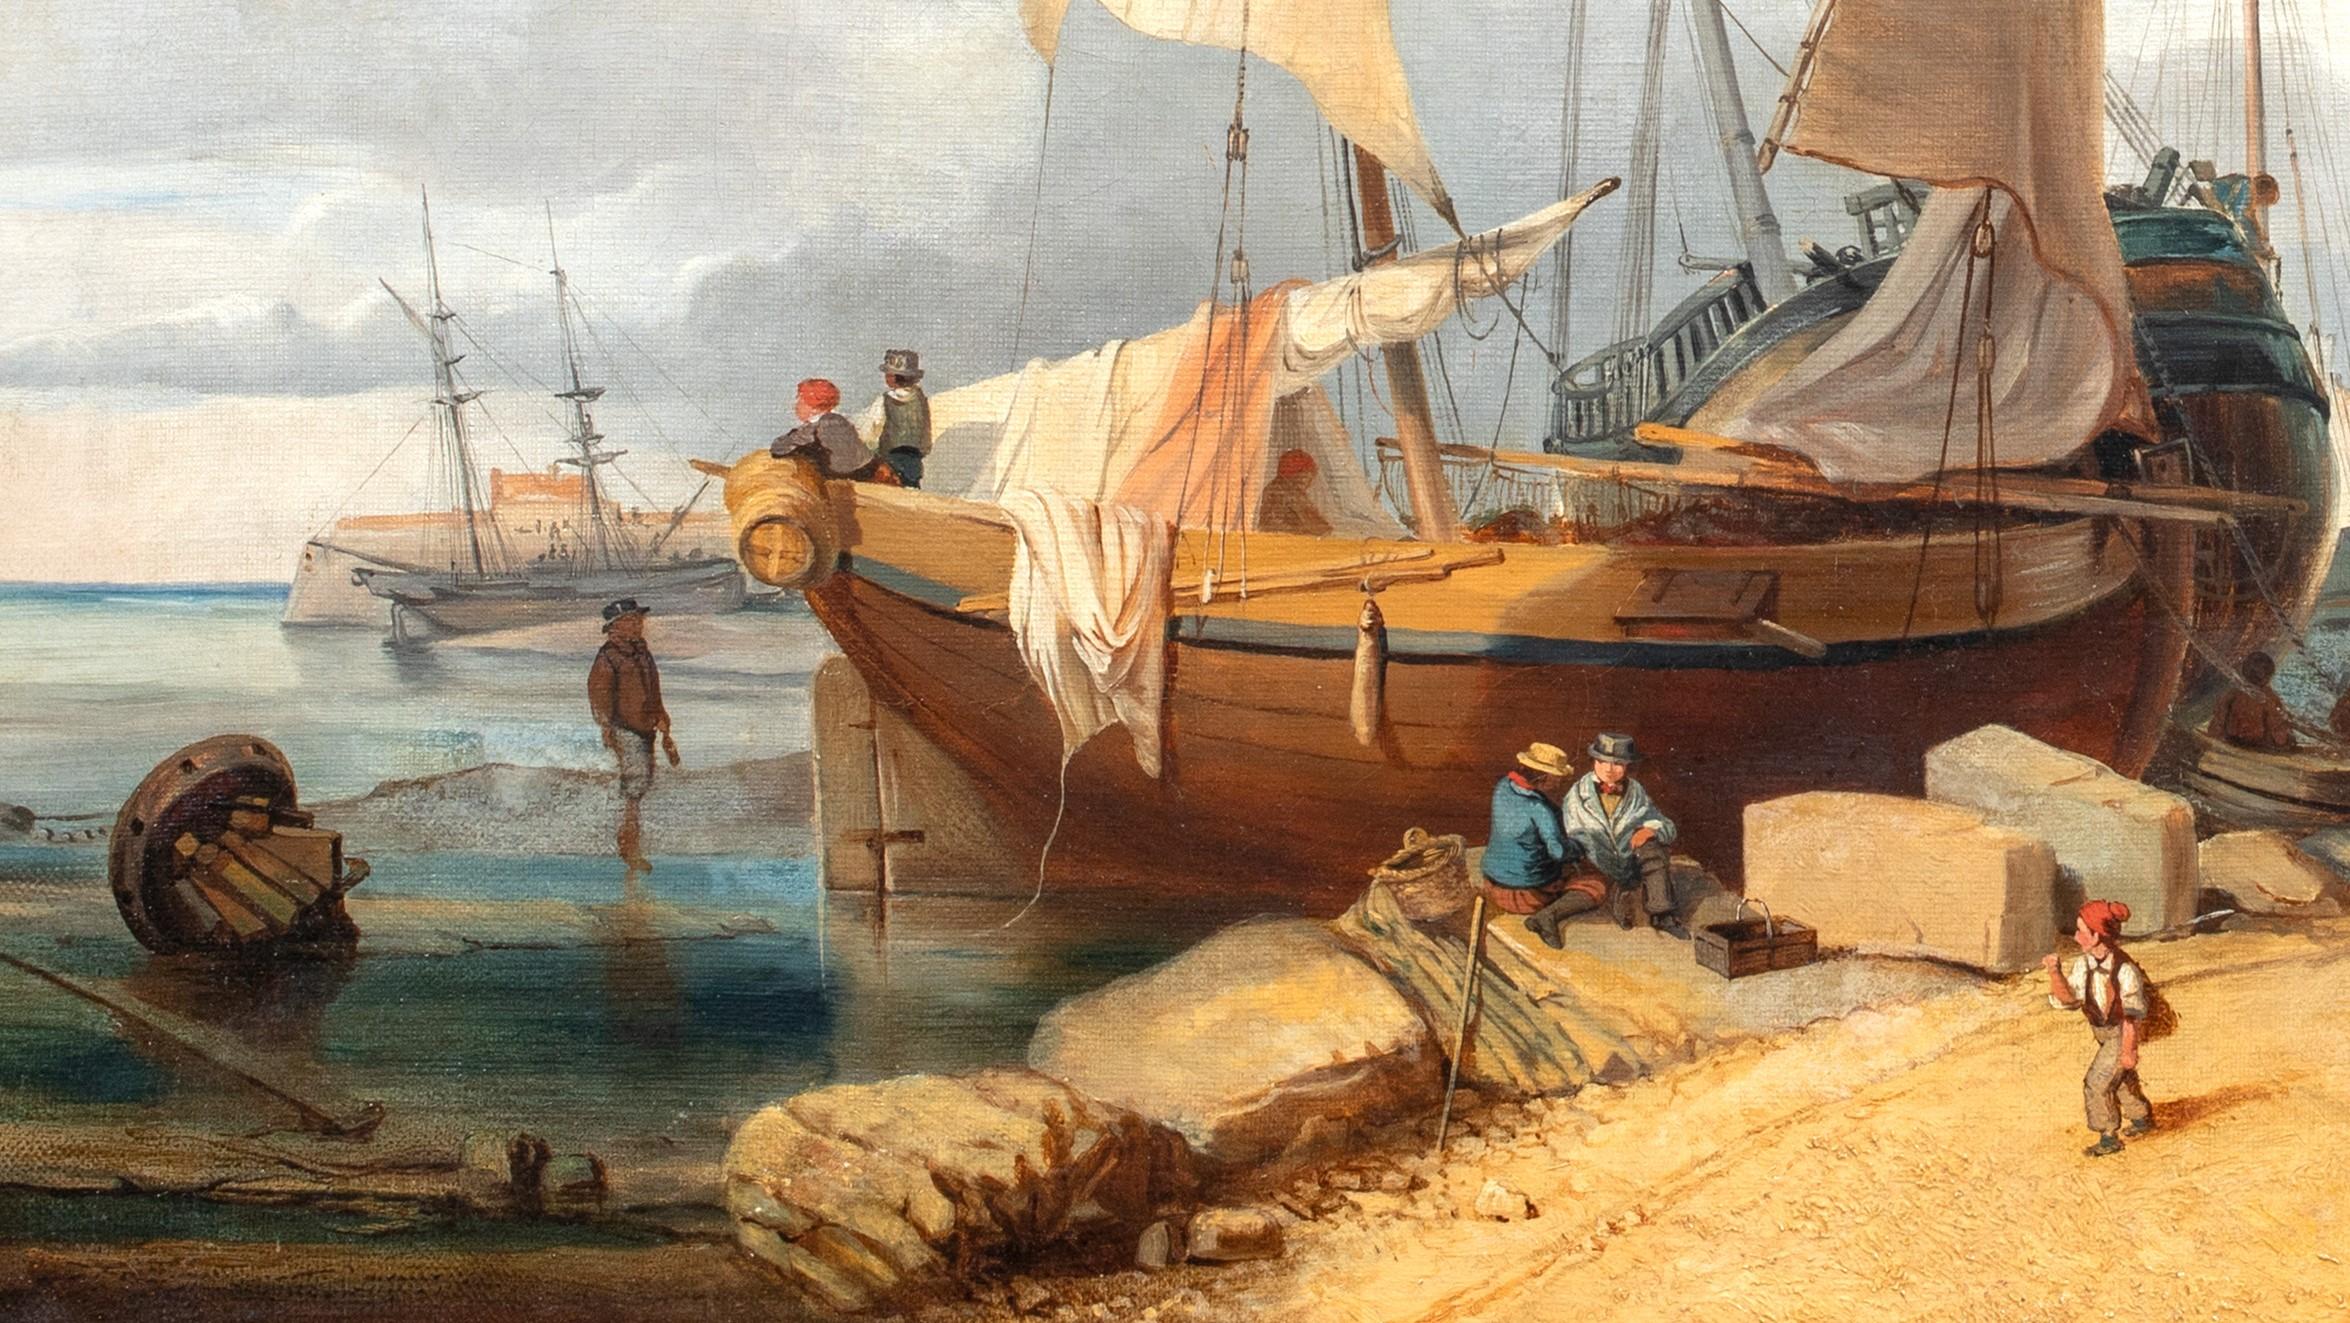 Normandy. 19th Century

circle of Cornelis Christiaan Dommershuizen (1842-1928)

Large 19th Century coastal scene at Normandy, oil on canvas. Excellent quality and condition view of fisherfolk at Normandy unloading the days catch. Presented in an